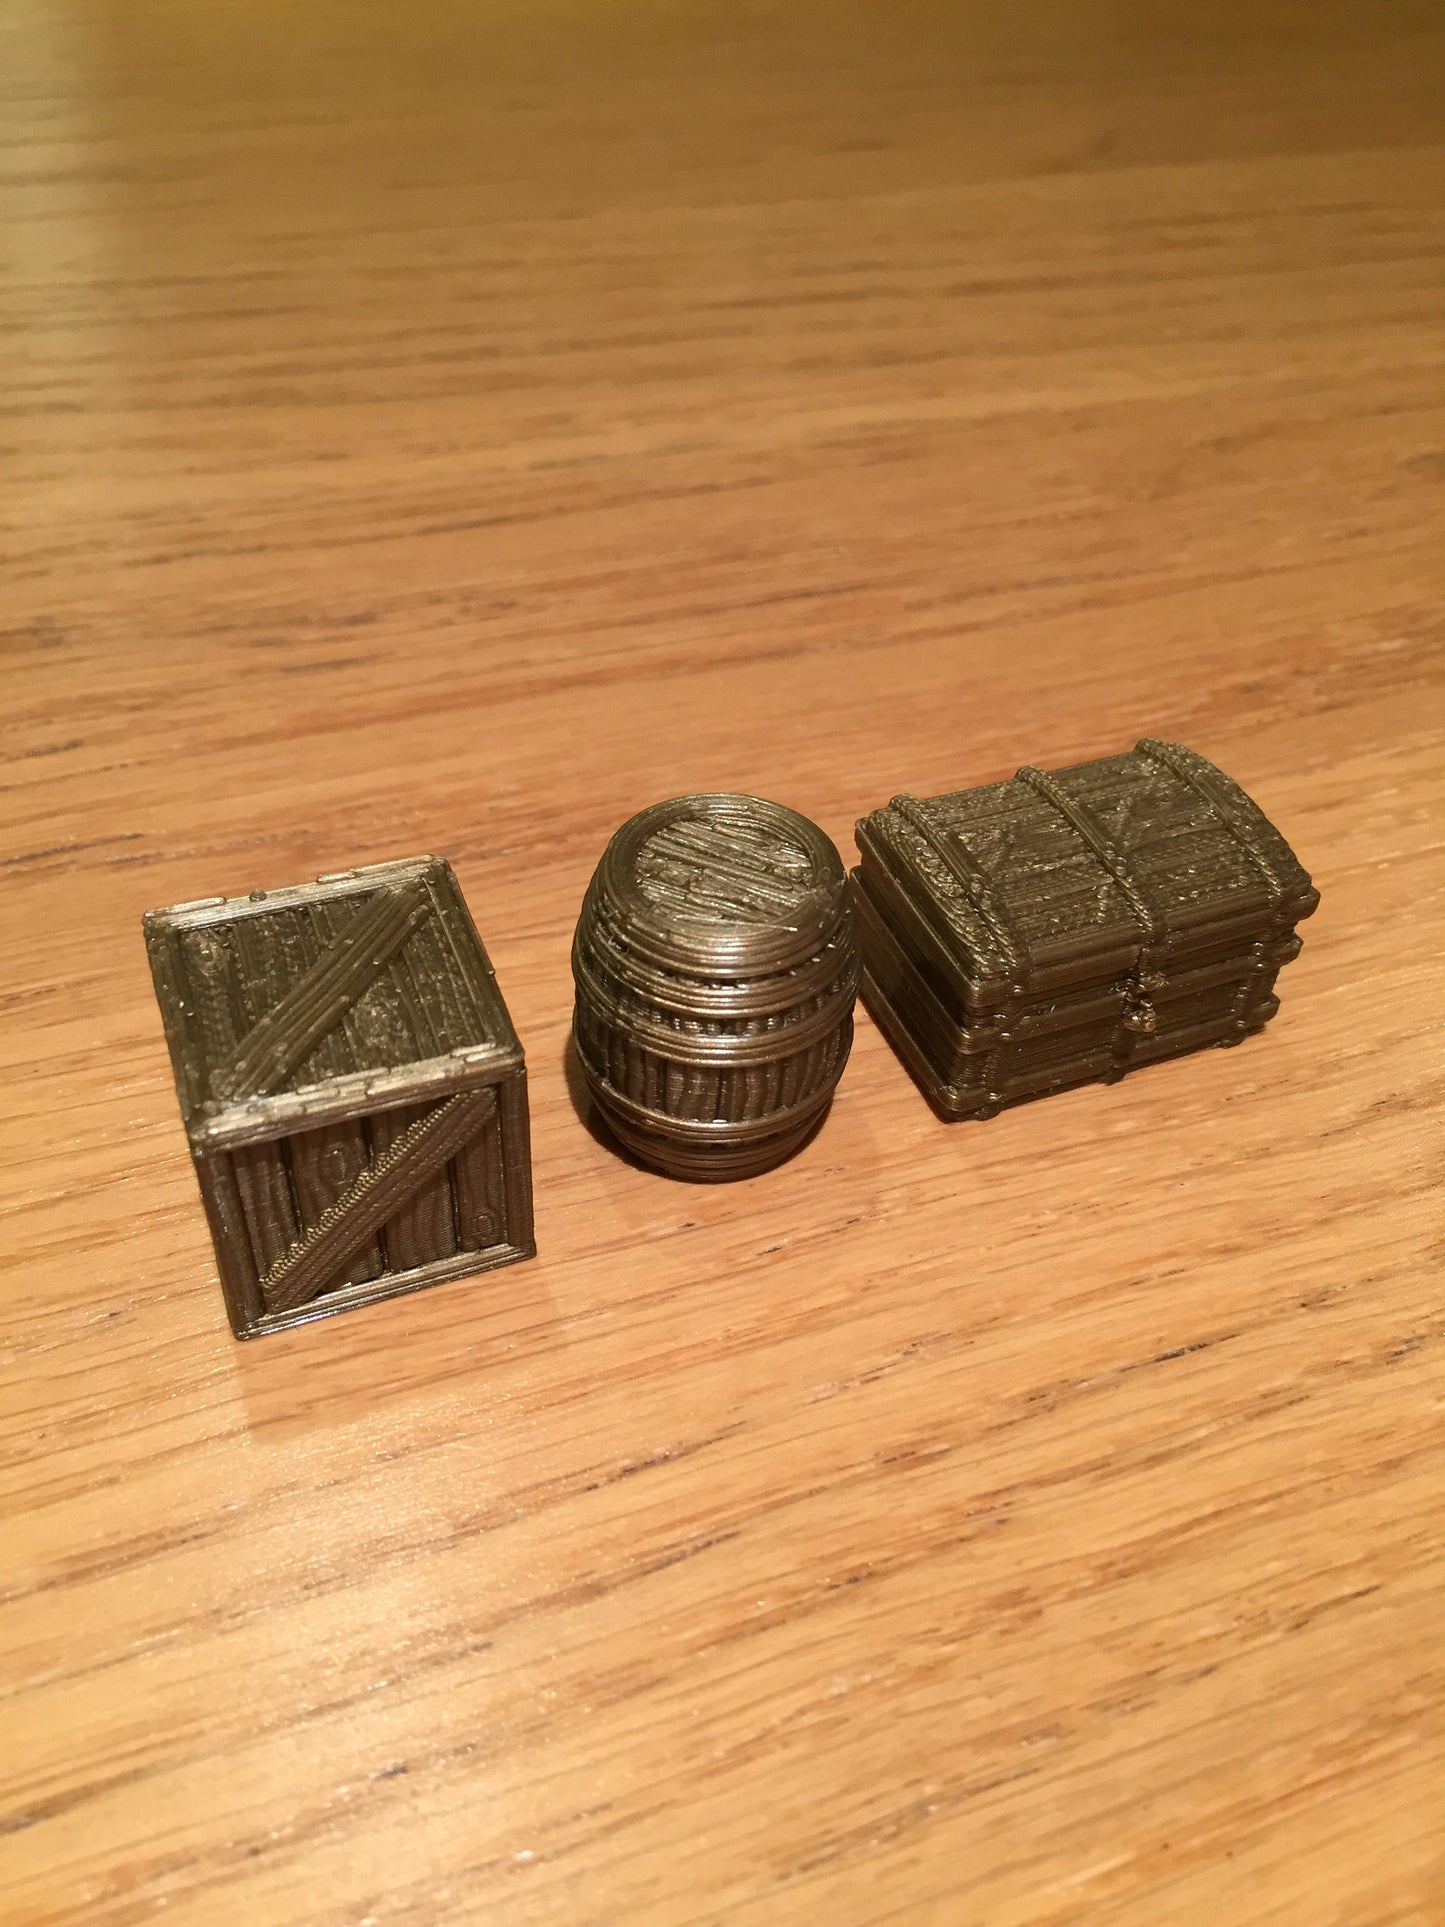 Barrels, Crates, and Chests - 8 of each - Gloomhaven / DnD / Wargaming / Terrain / Dungeons and Dragons / Tabletop